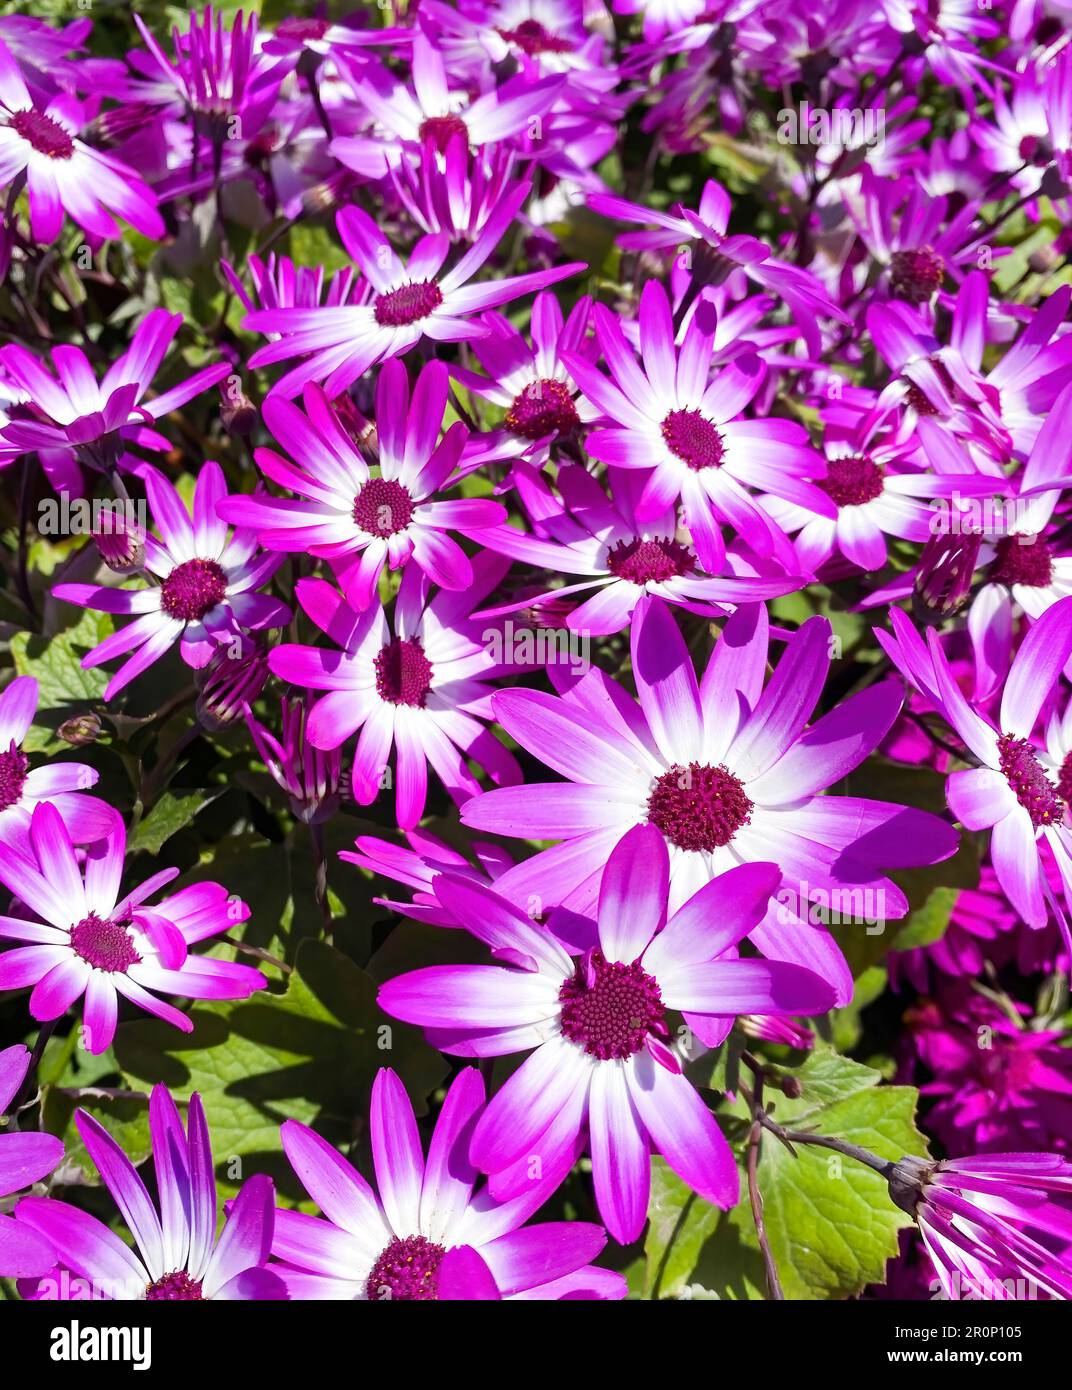 Vibrant purple and white flowers, Pericallis Hybrida in Asterceae family, also known as Cineraria or  Ragwort, perennial ornamental flowering plant. Stock Photo